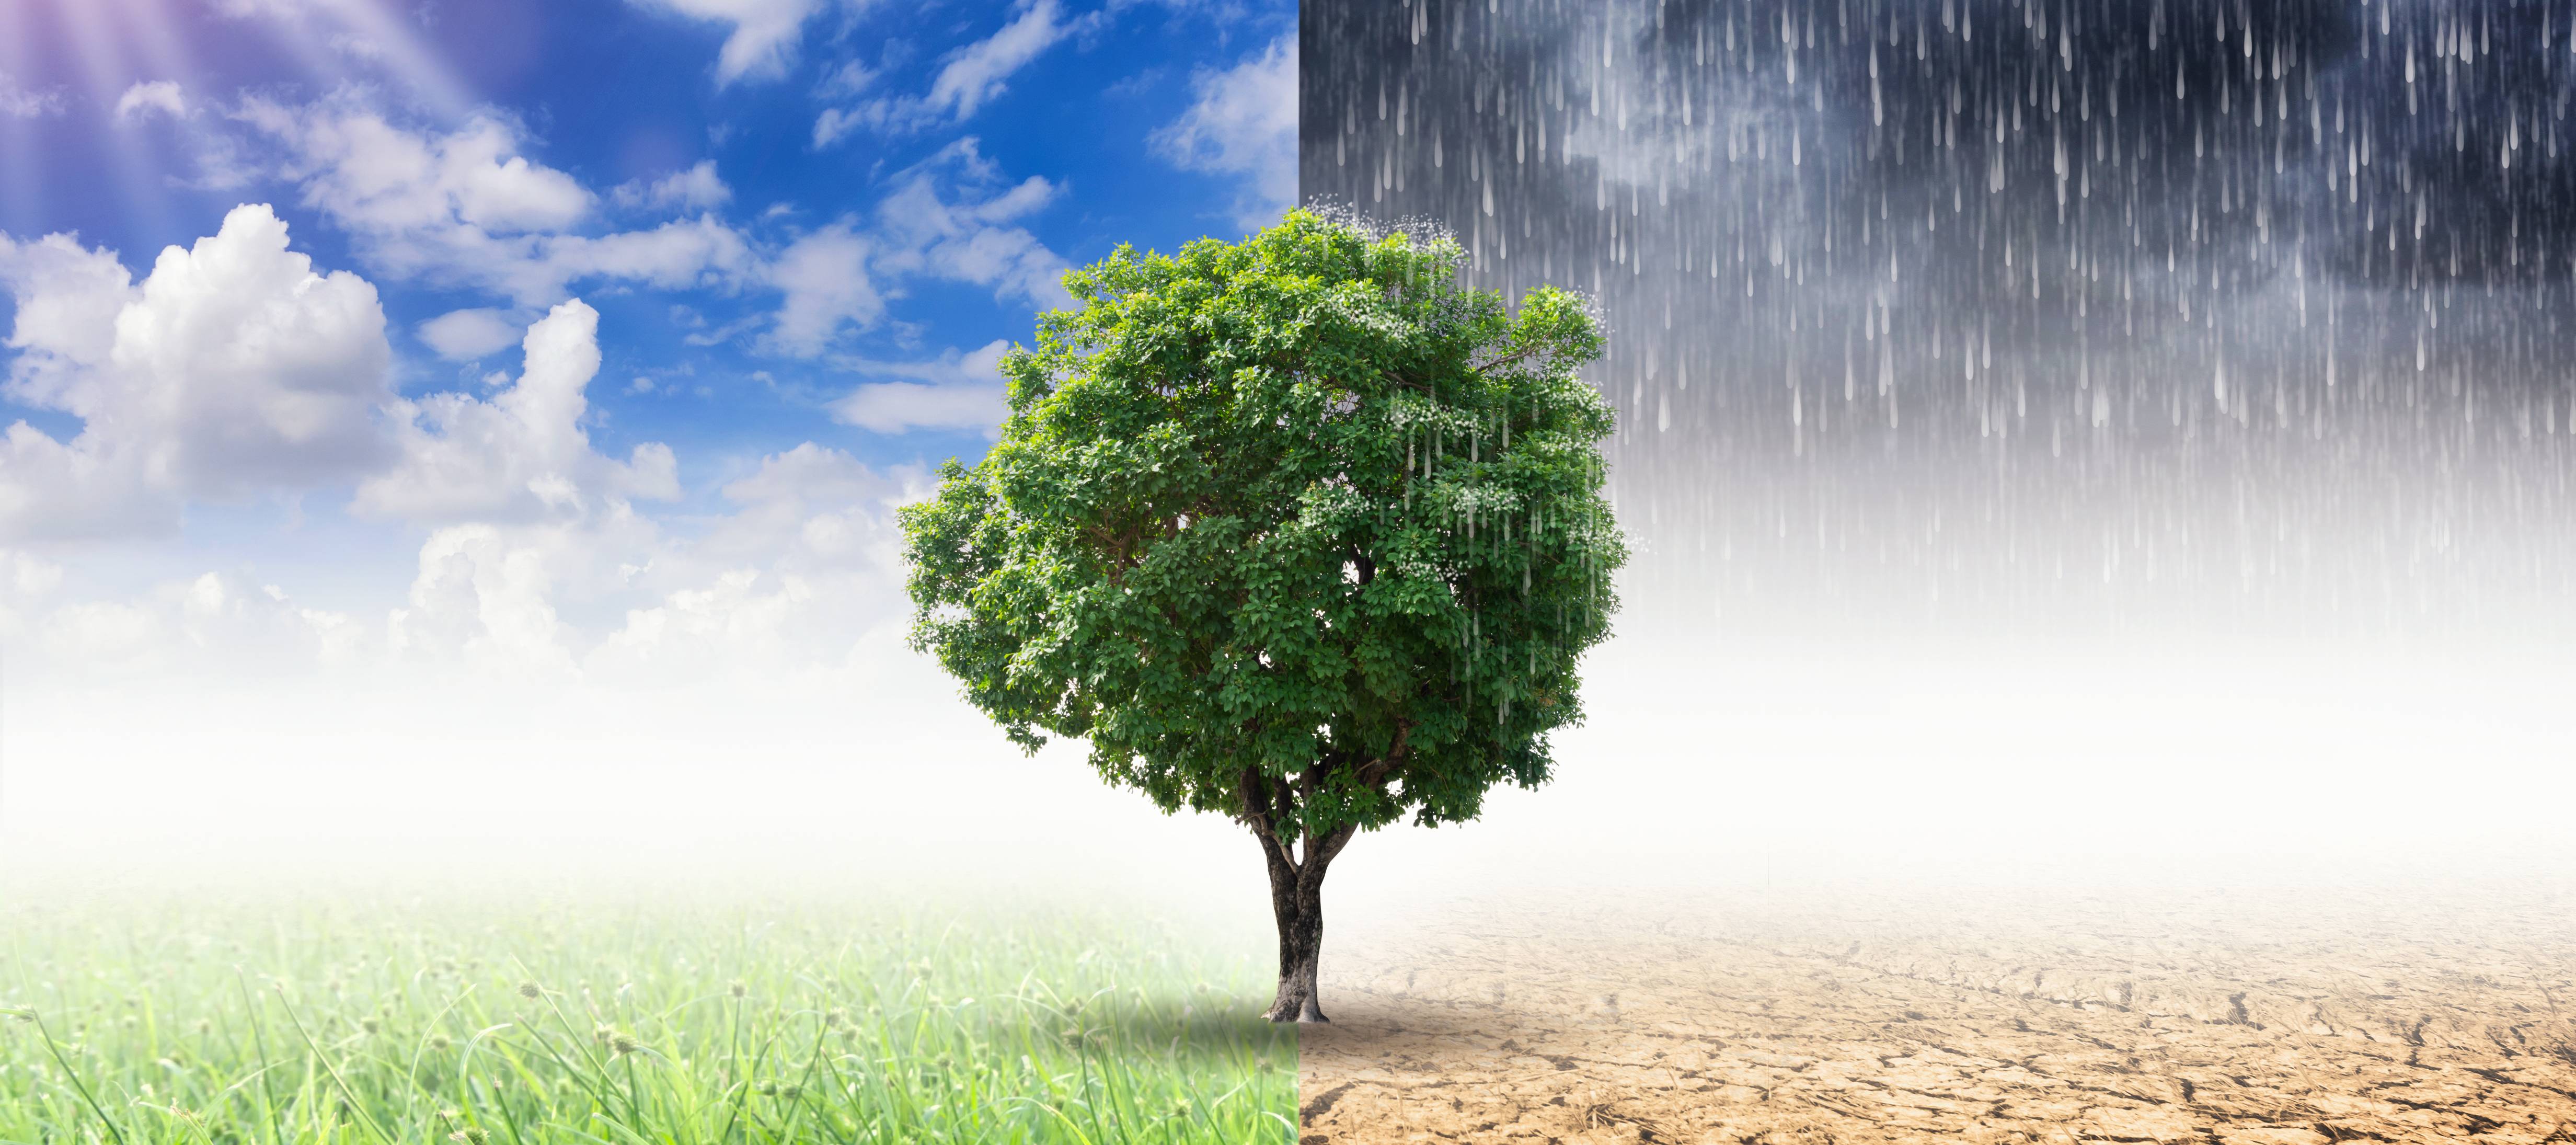 a graphic depicting climate change and extreme weather, though showing a tree in nature between lush nature and a stormy desert.